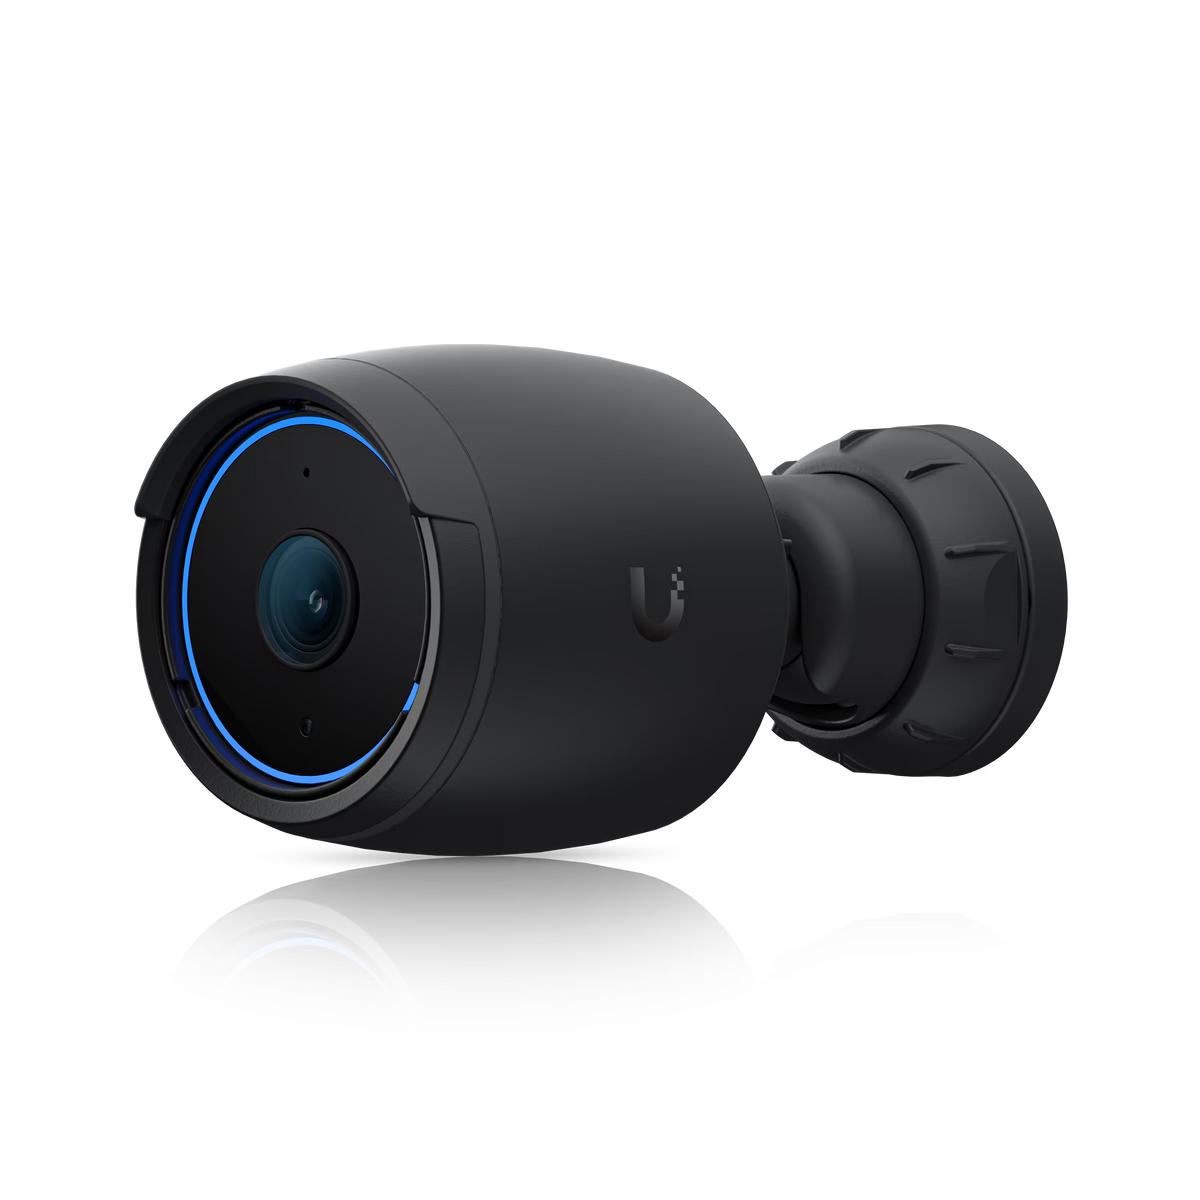 Ubiquiti Networks UniFi AI 4MP Outdoor Network Bullet Camera with Night Vision